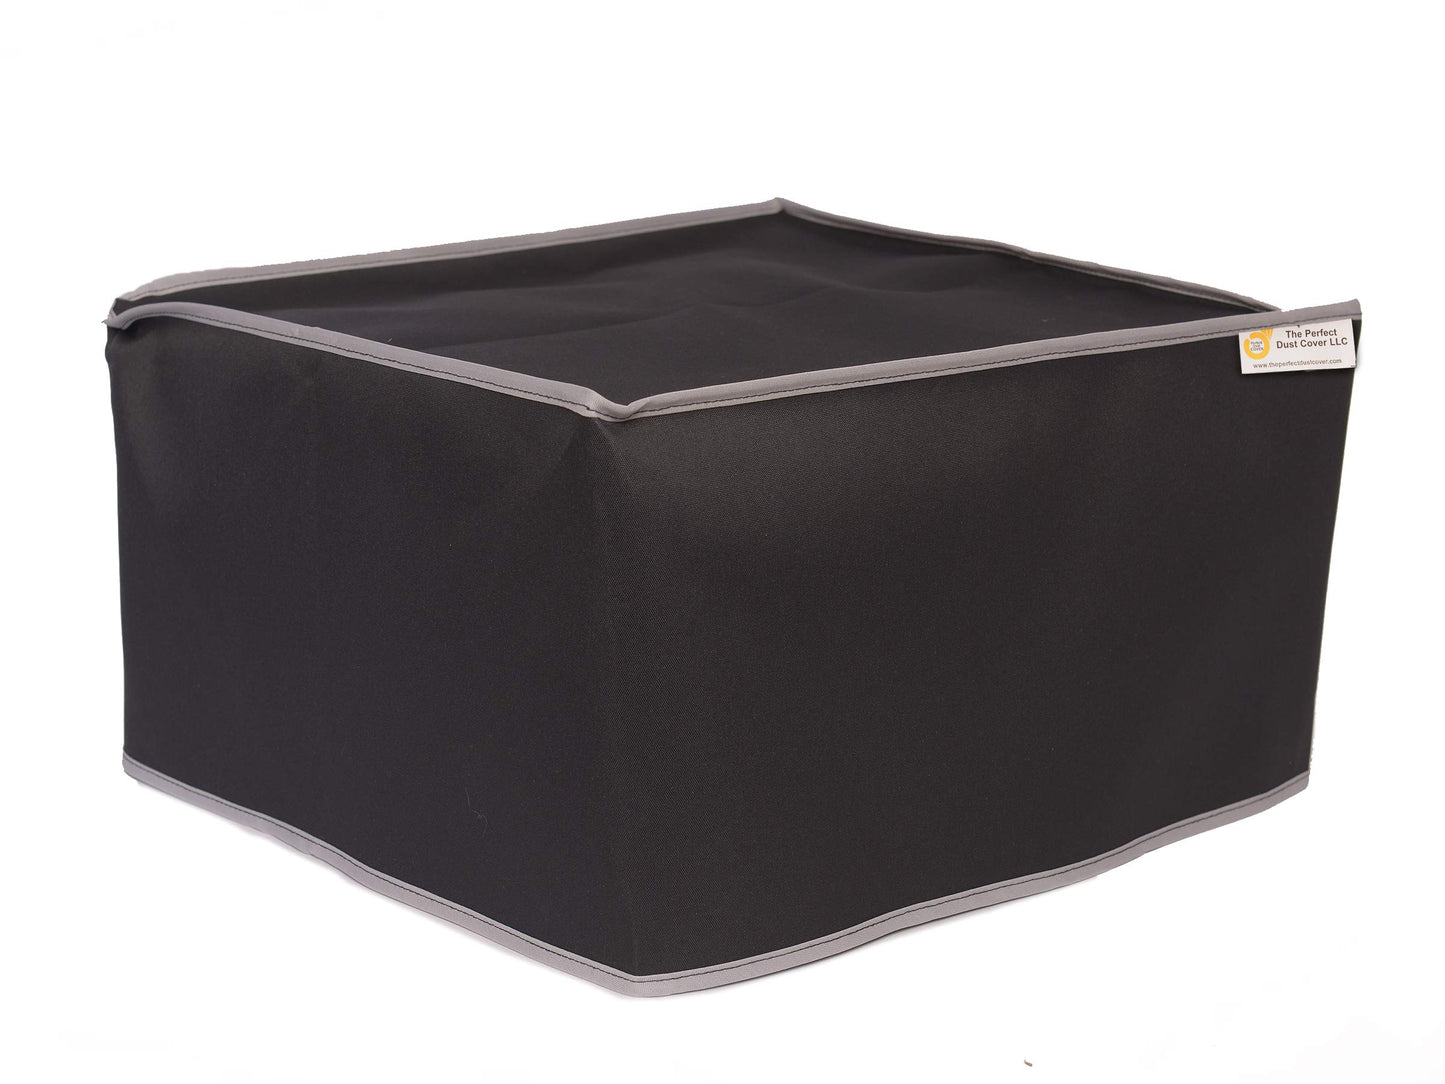 The Perfect Dust Cover, Black Nylon Cover for Canon ImageCLASS MF236n Black and White Laser Printer, Anti Static and Waterproof Dimensions 15.4''W x 14.7''D x 14.2''H by The Perfect Dust Cover LLC